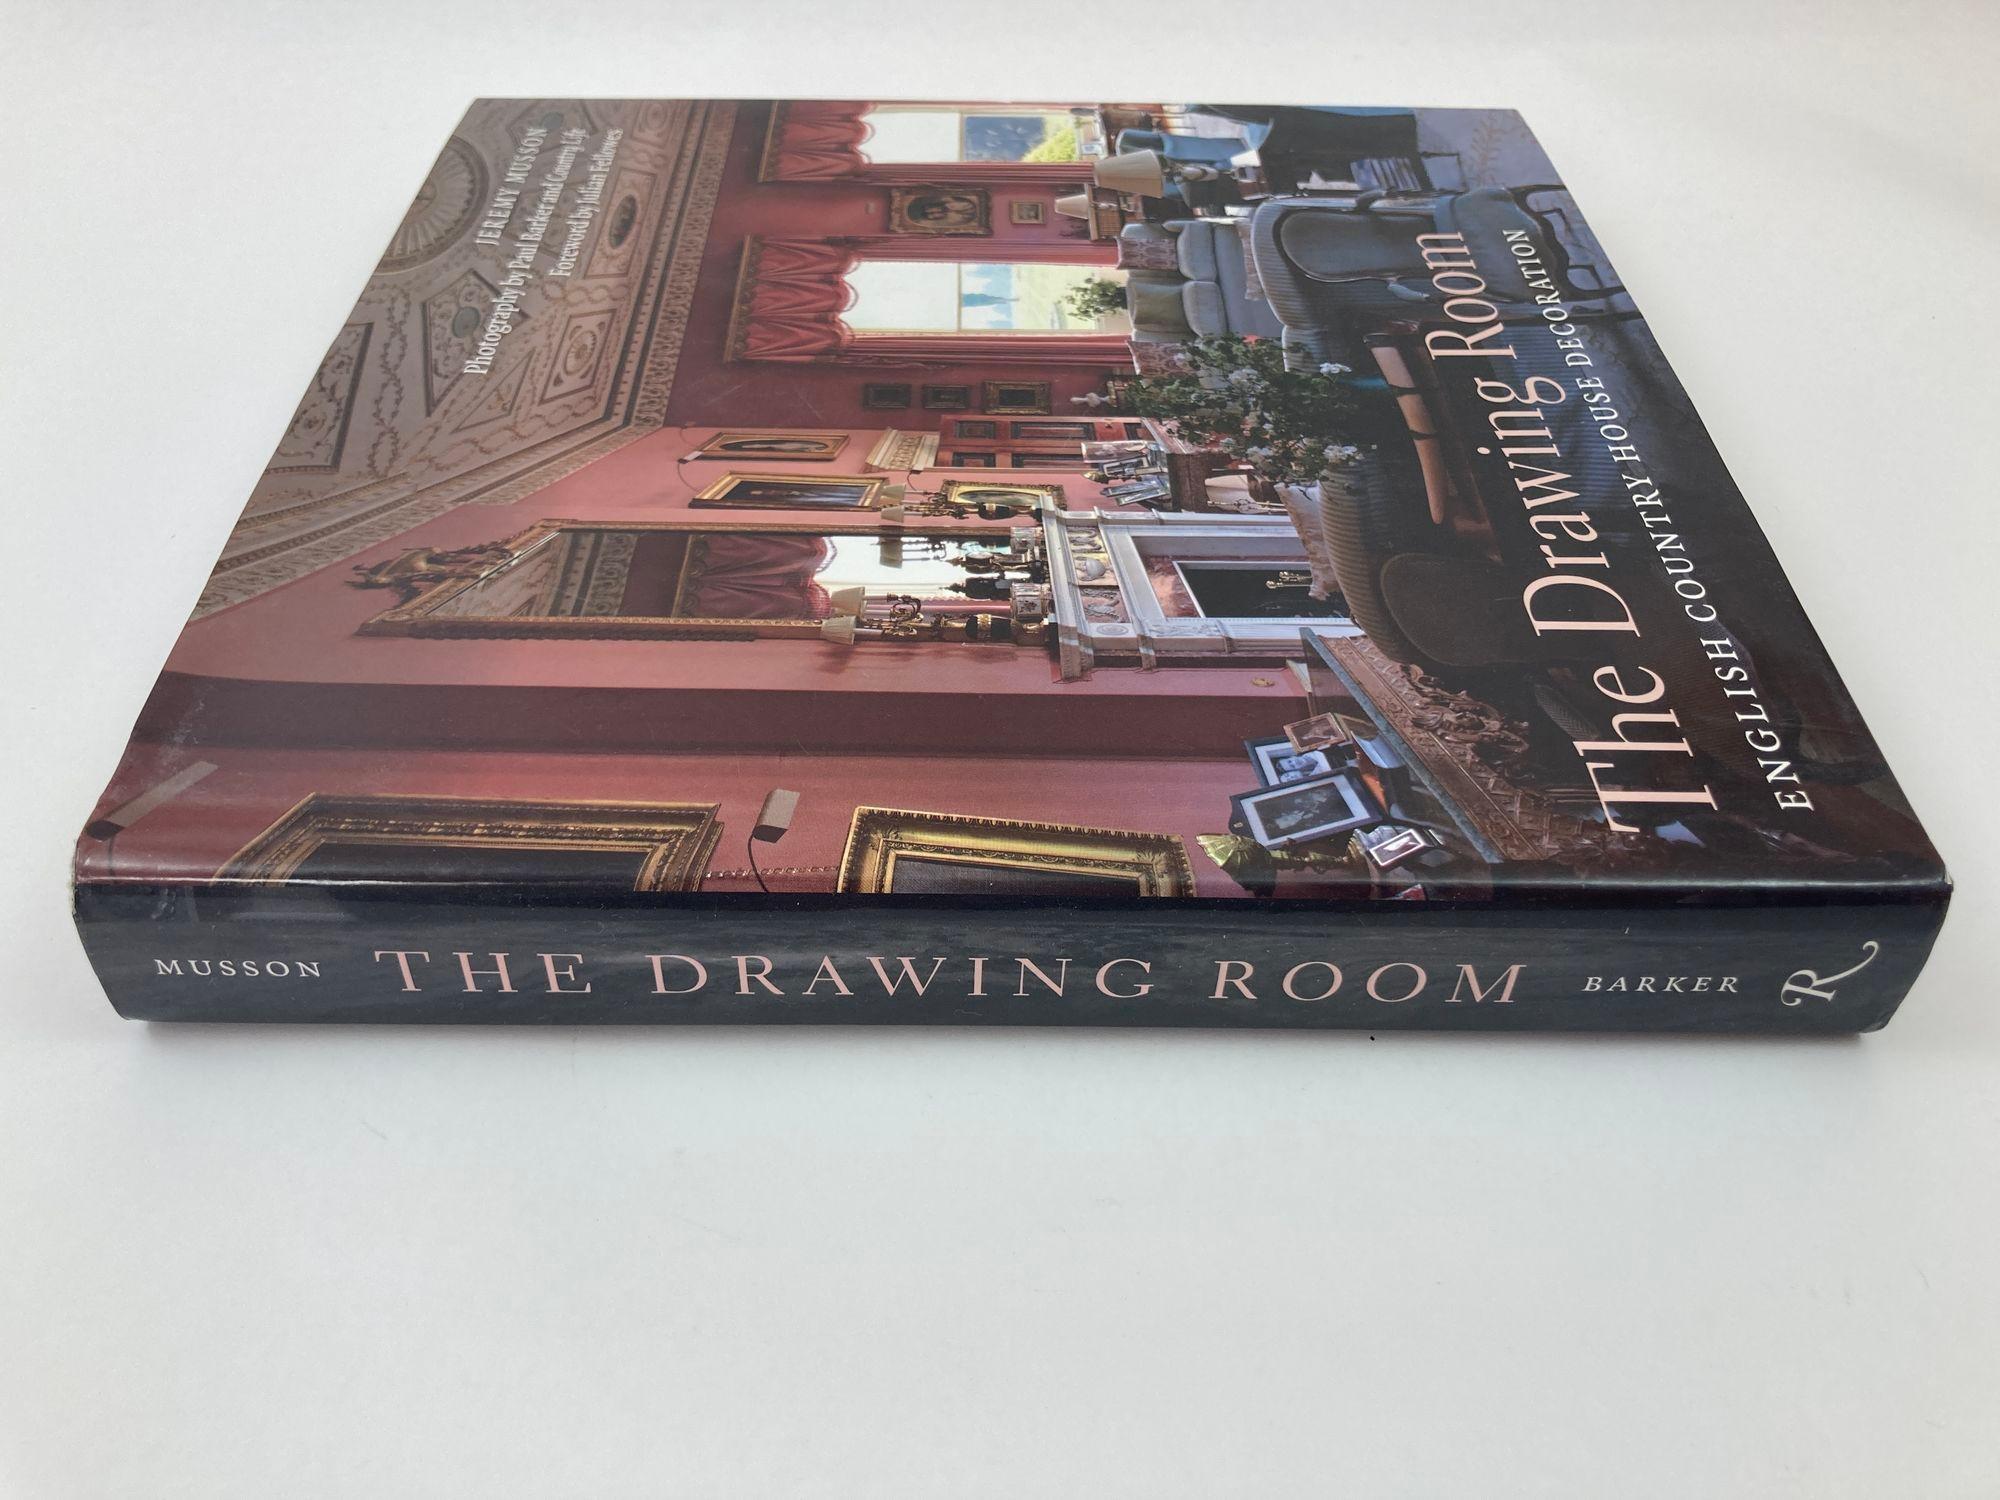 British The Drawing Room English Country House Decoration by J Musson Hardcover Book For Sale